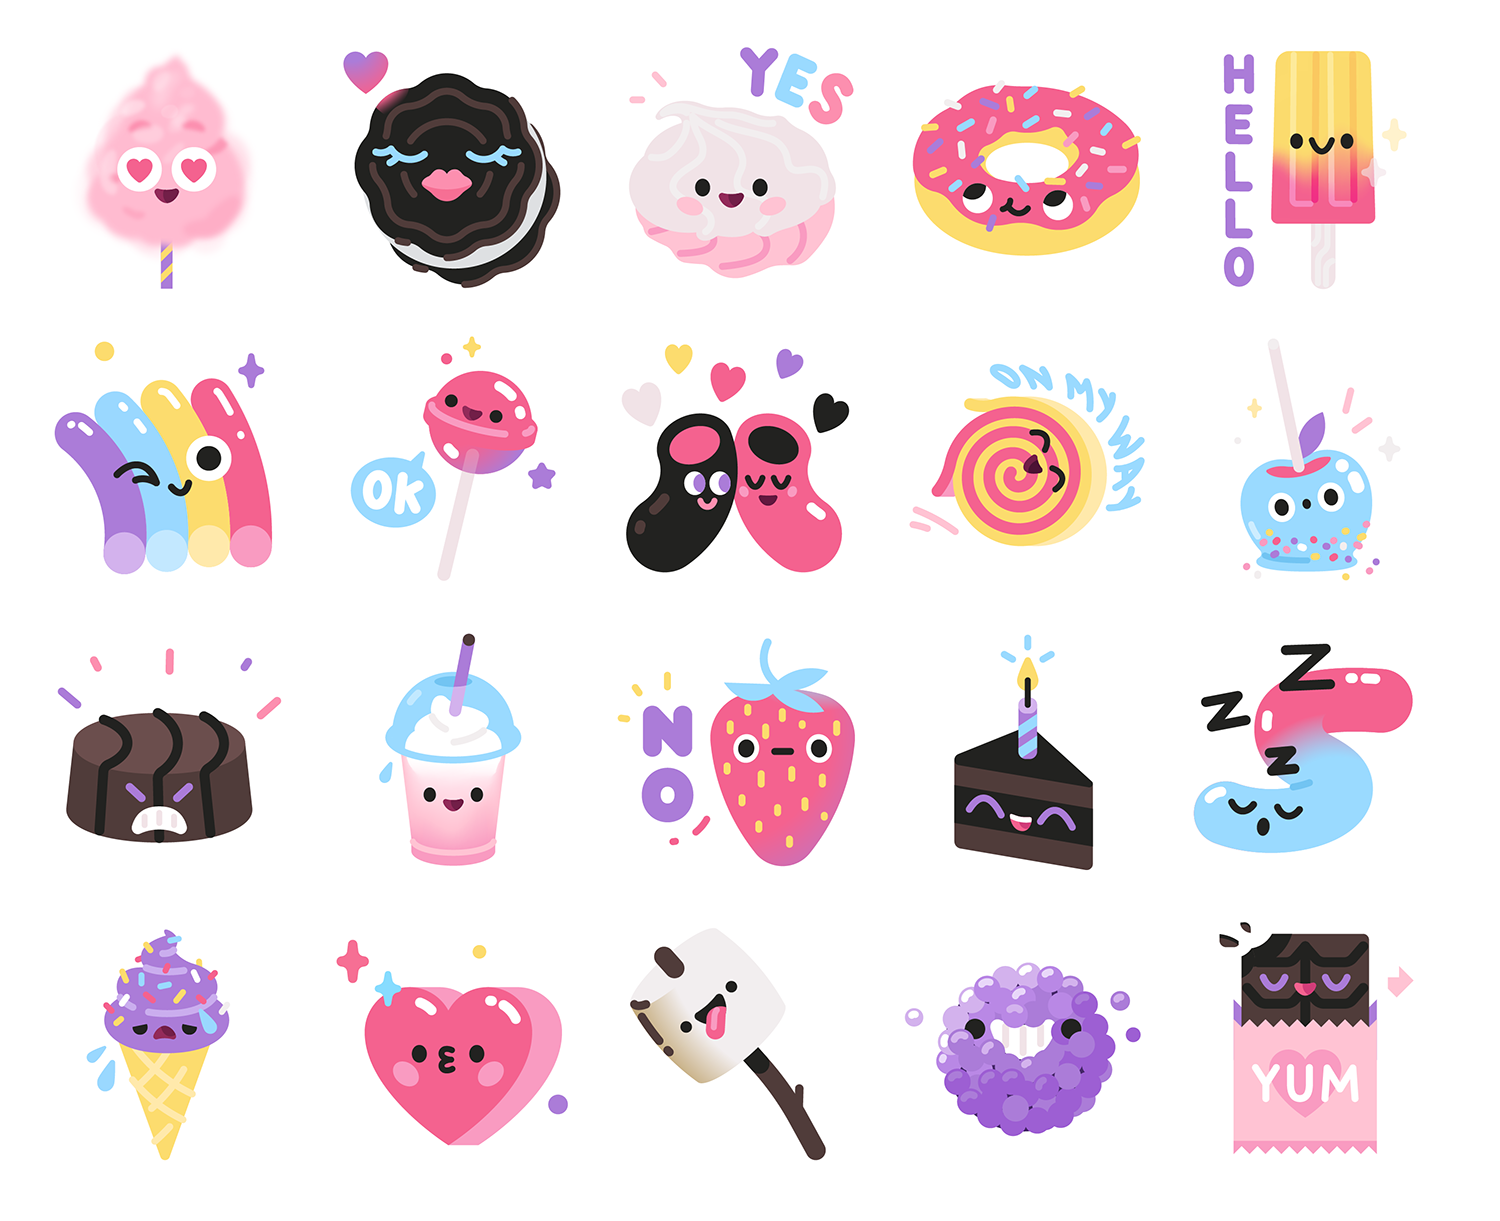 Sweet by MishaX on Dribbble